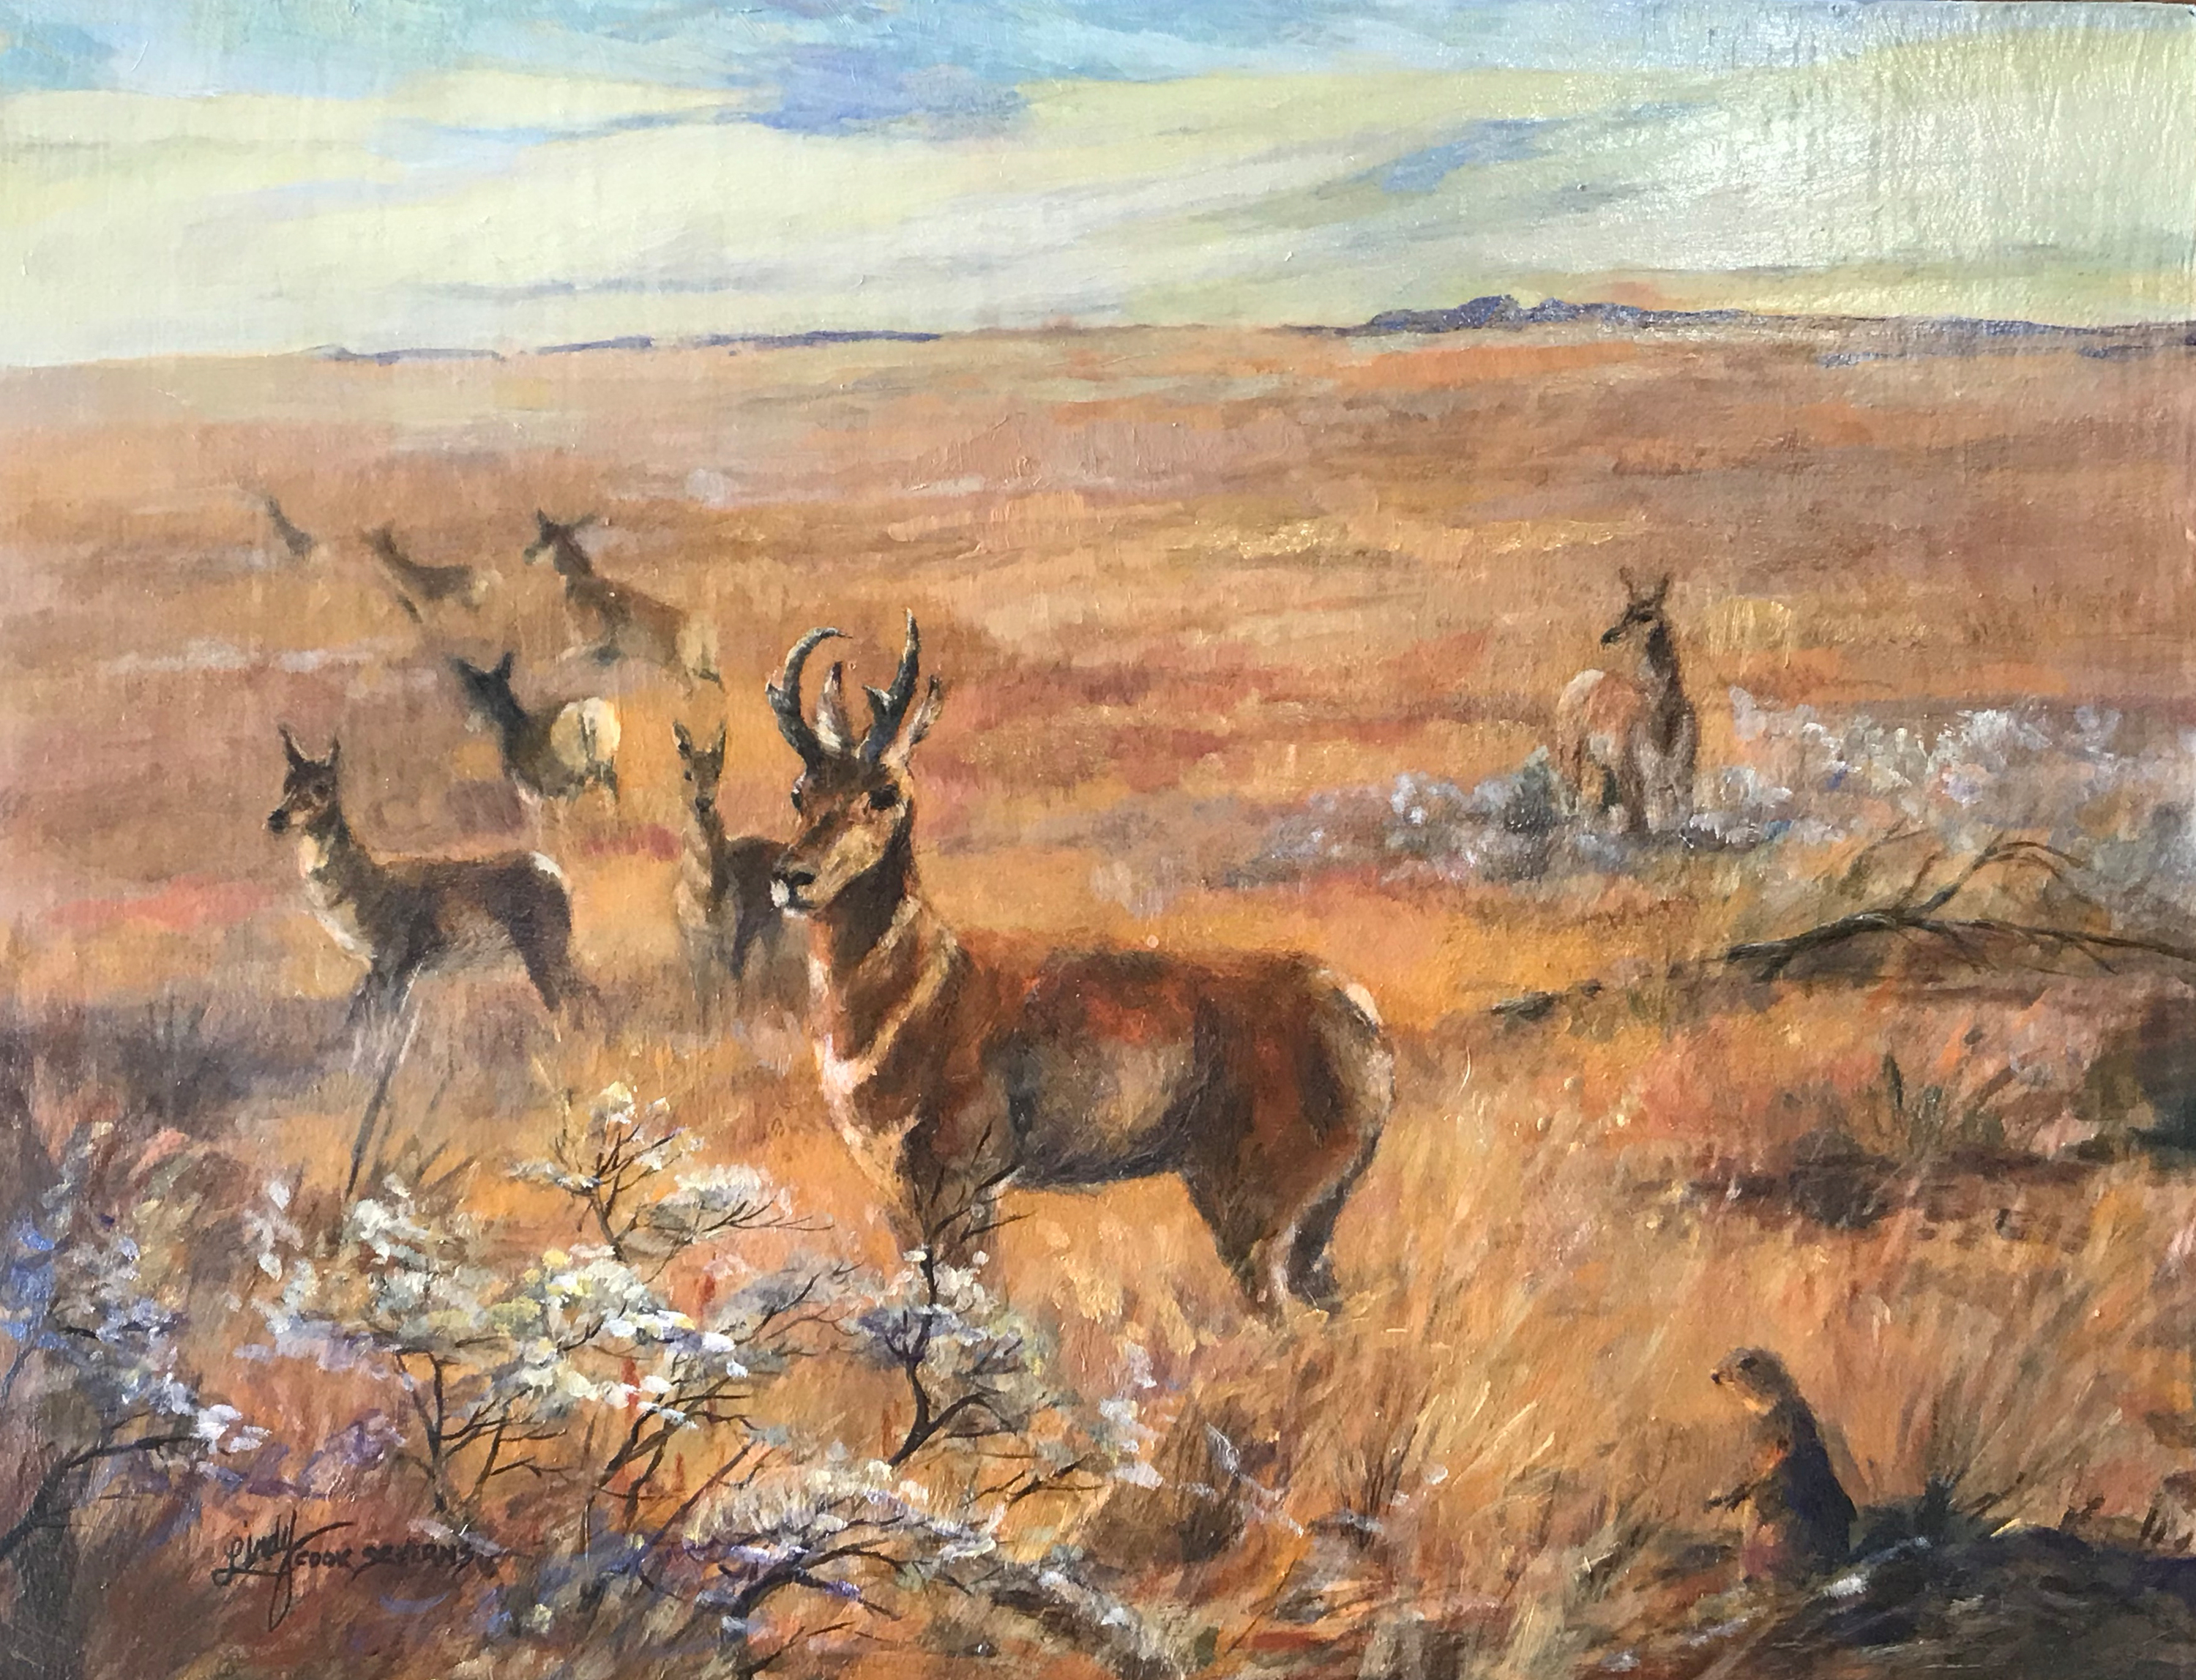 Where the antelope play 11x14 oil lindy cook severns uqoflp